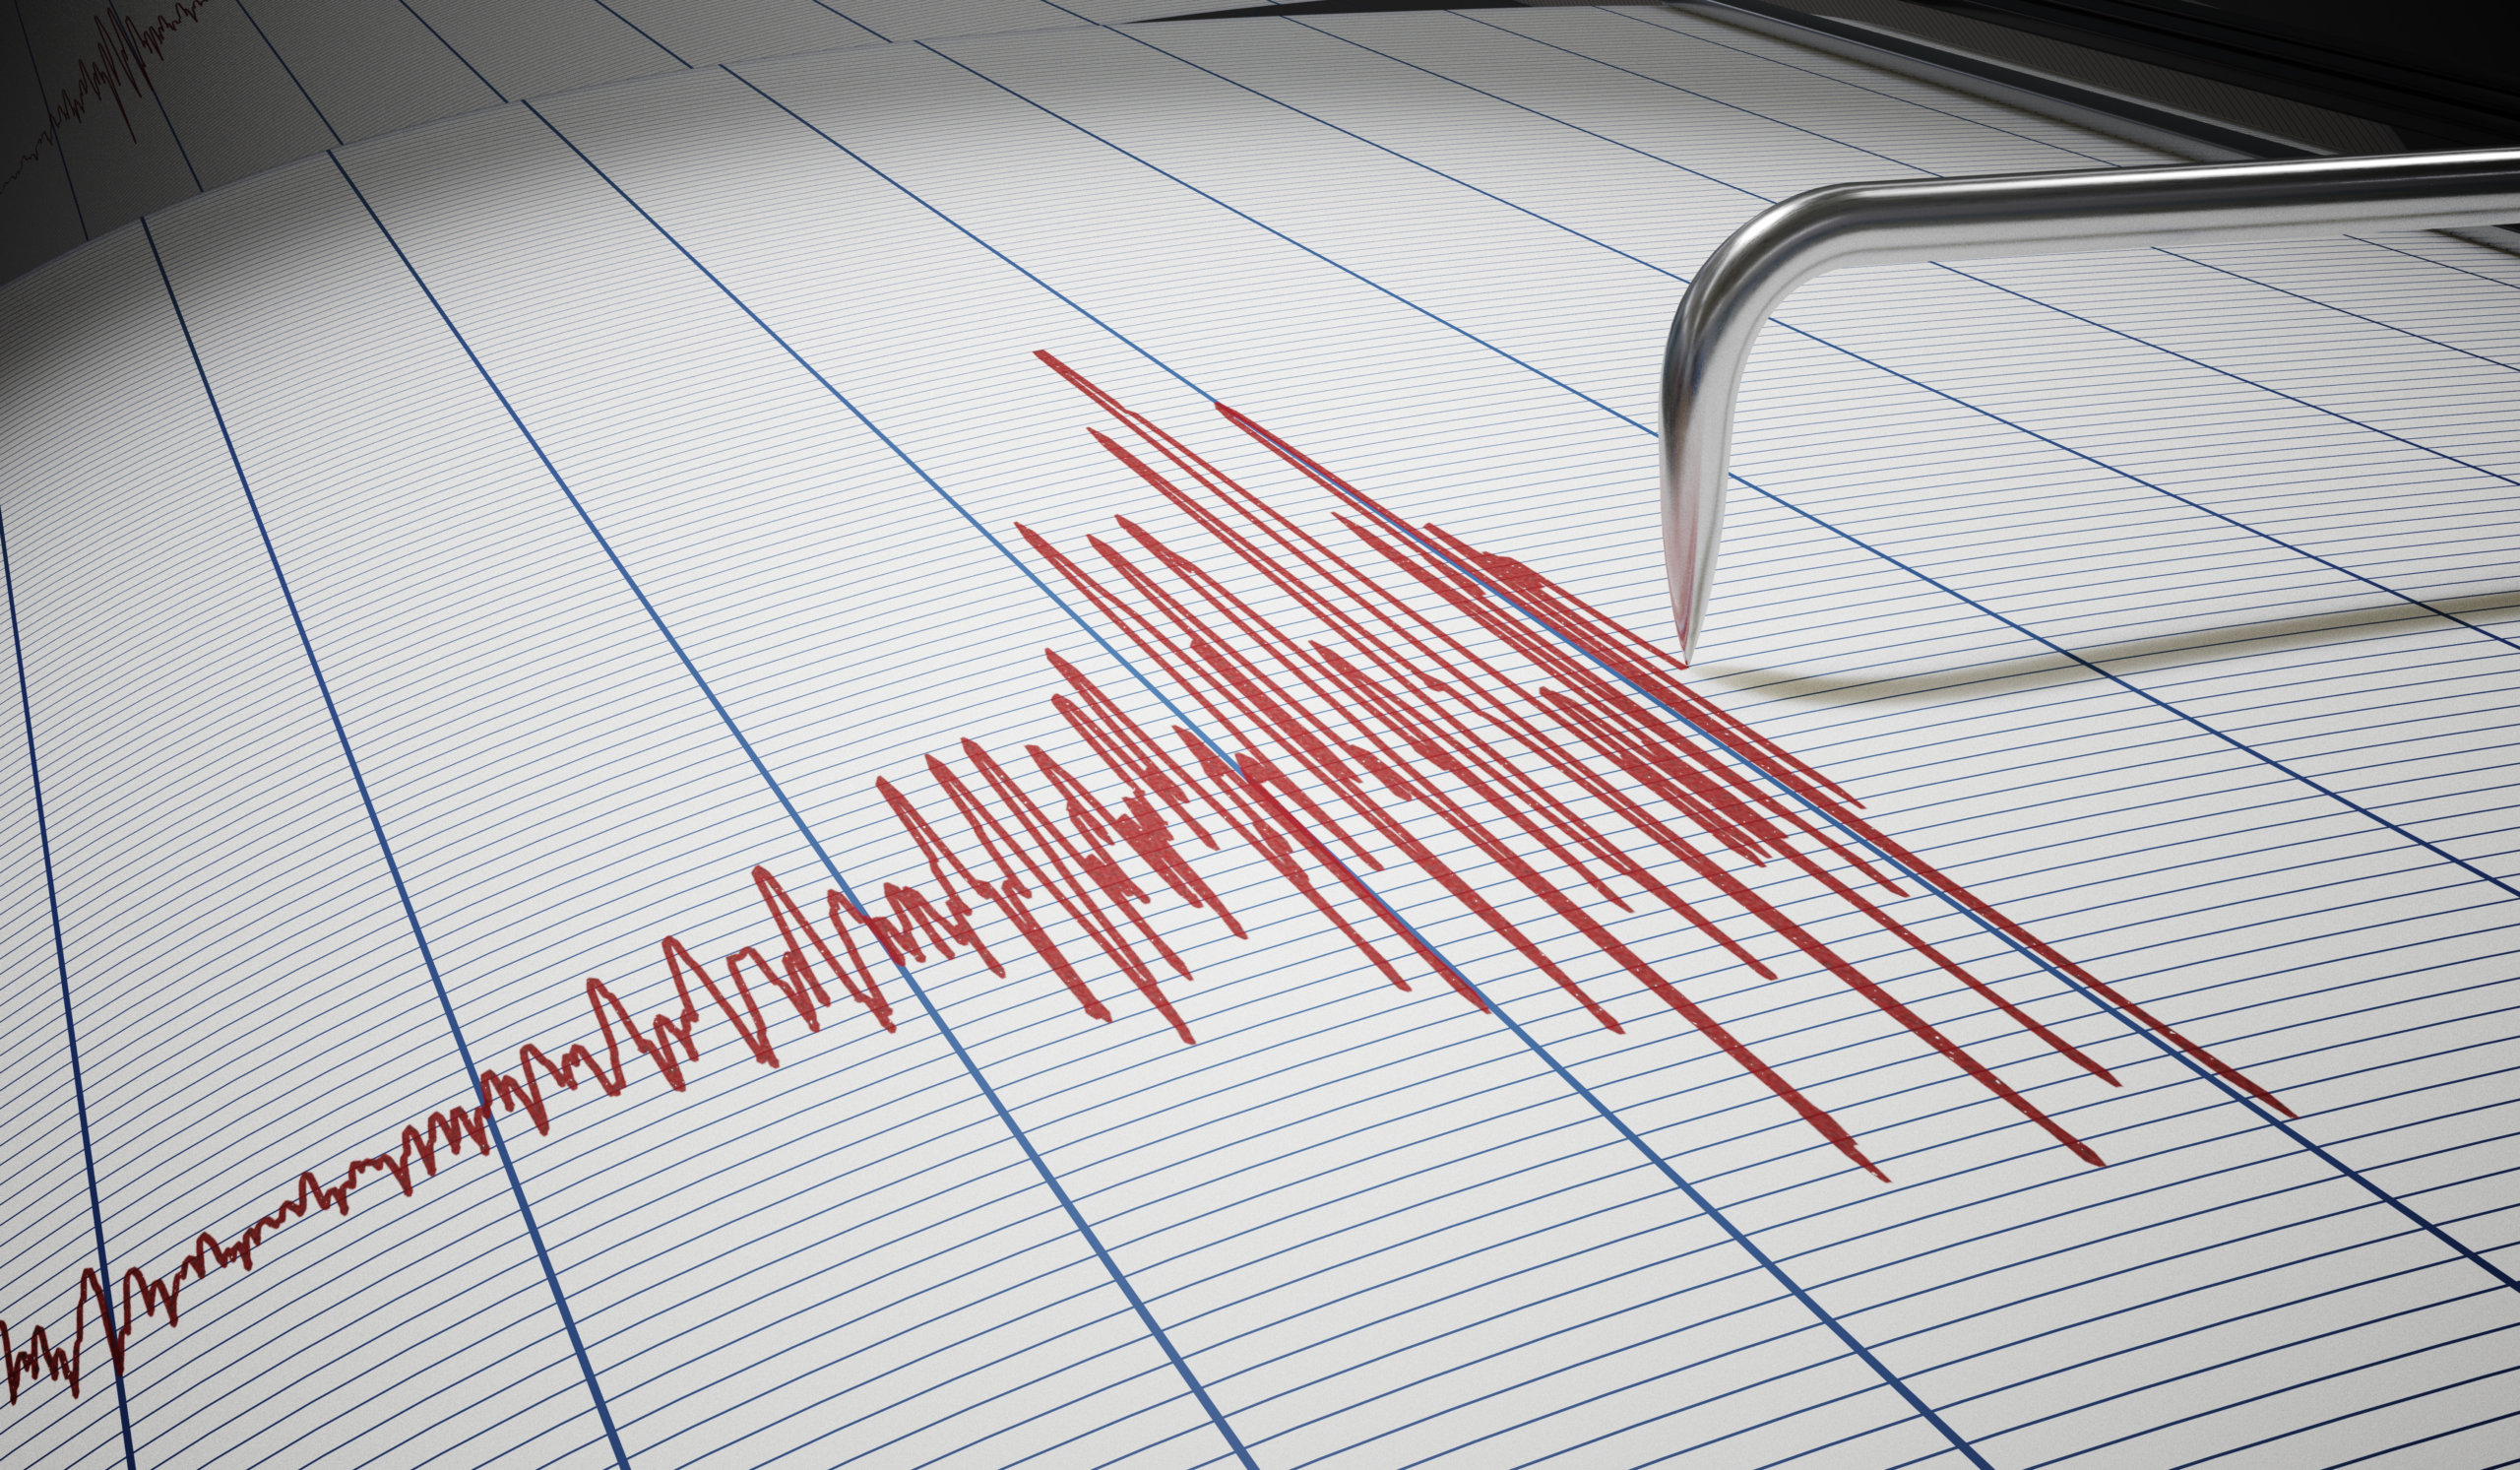 Rise in New Mexico earthquakes likely triggered by oil industry